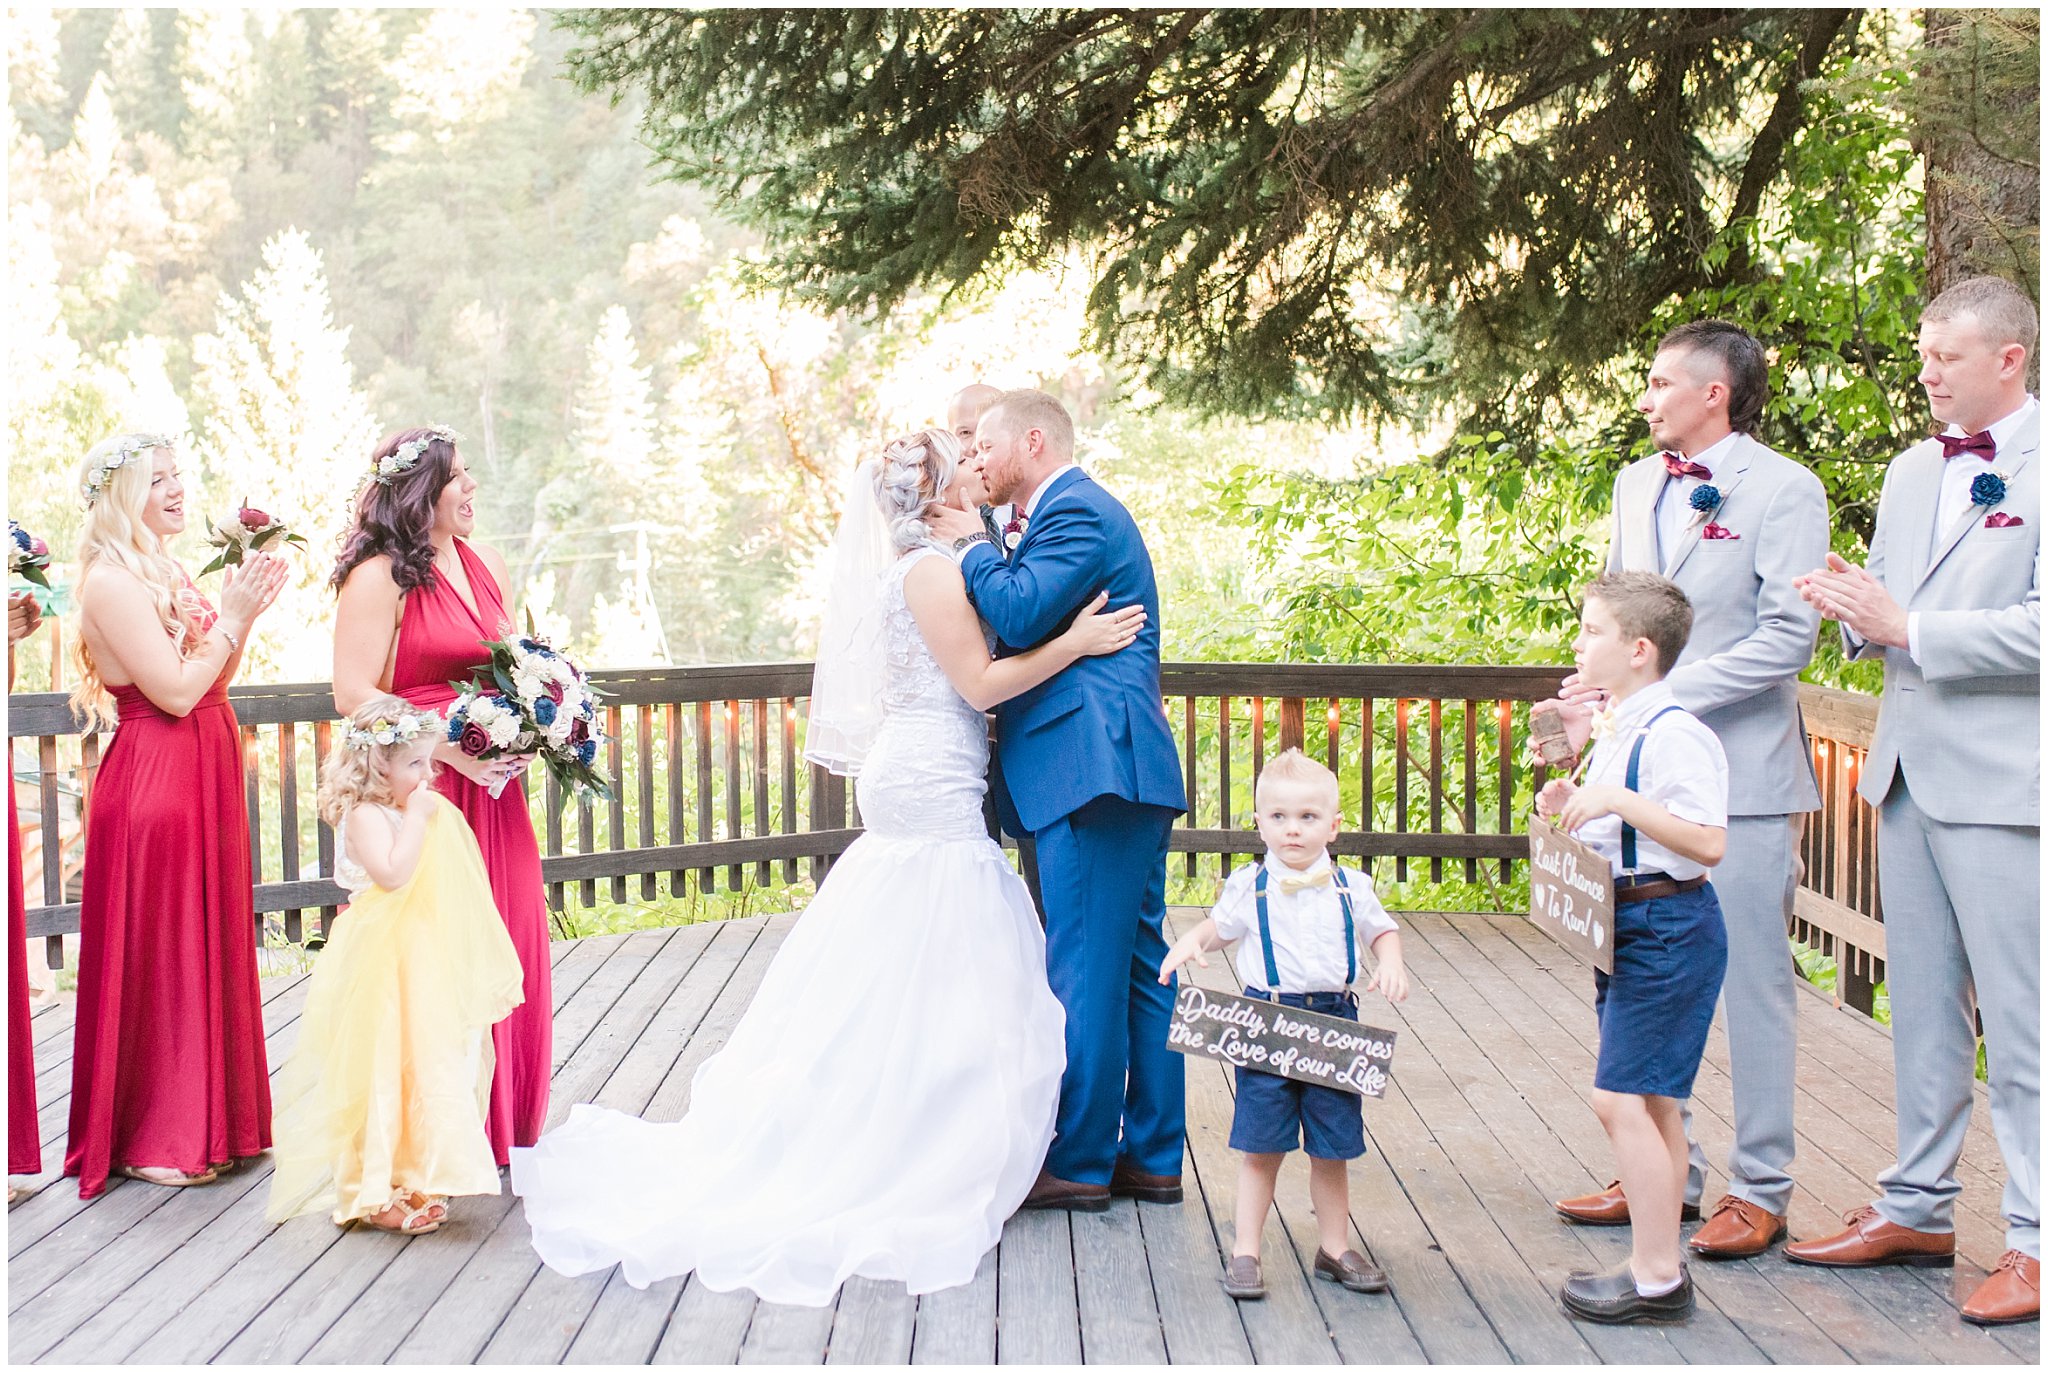 Bride and groom kiss at the alter | Log Haven Summer Mountain Wedding | Jessie and Dallin Photography